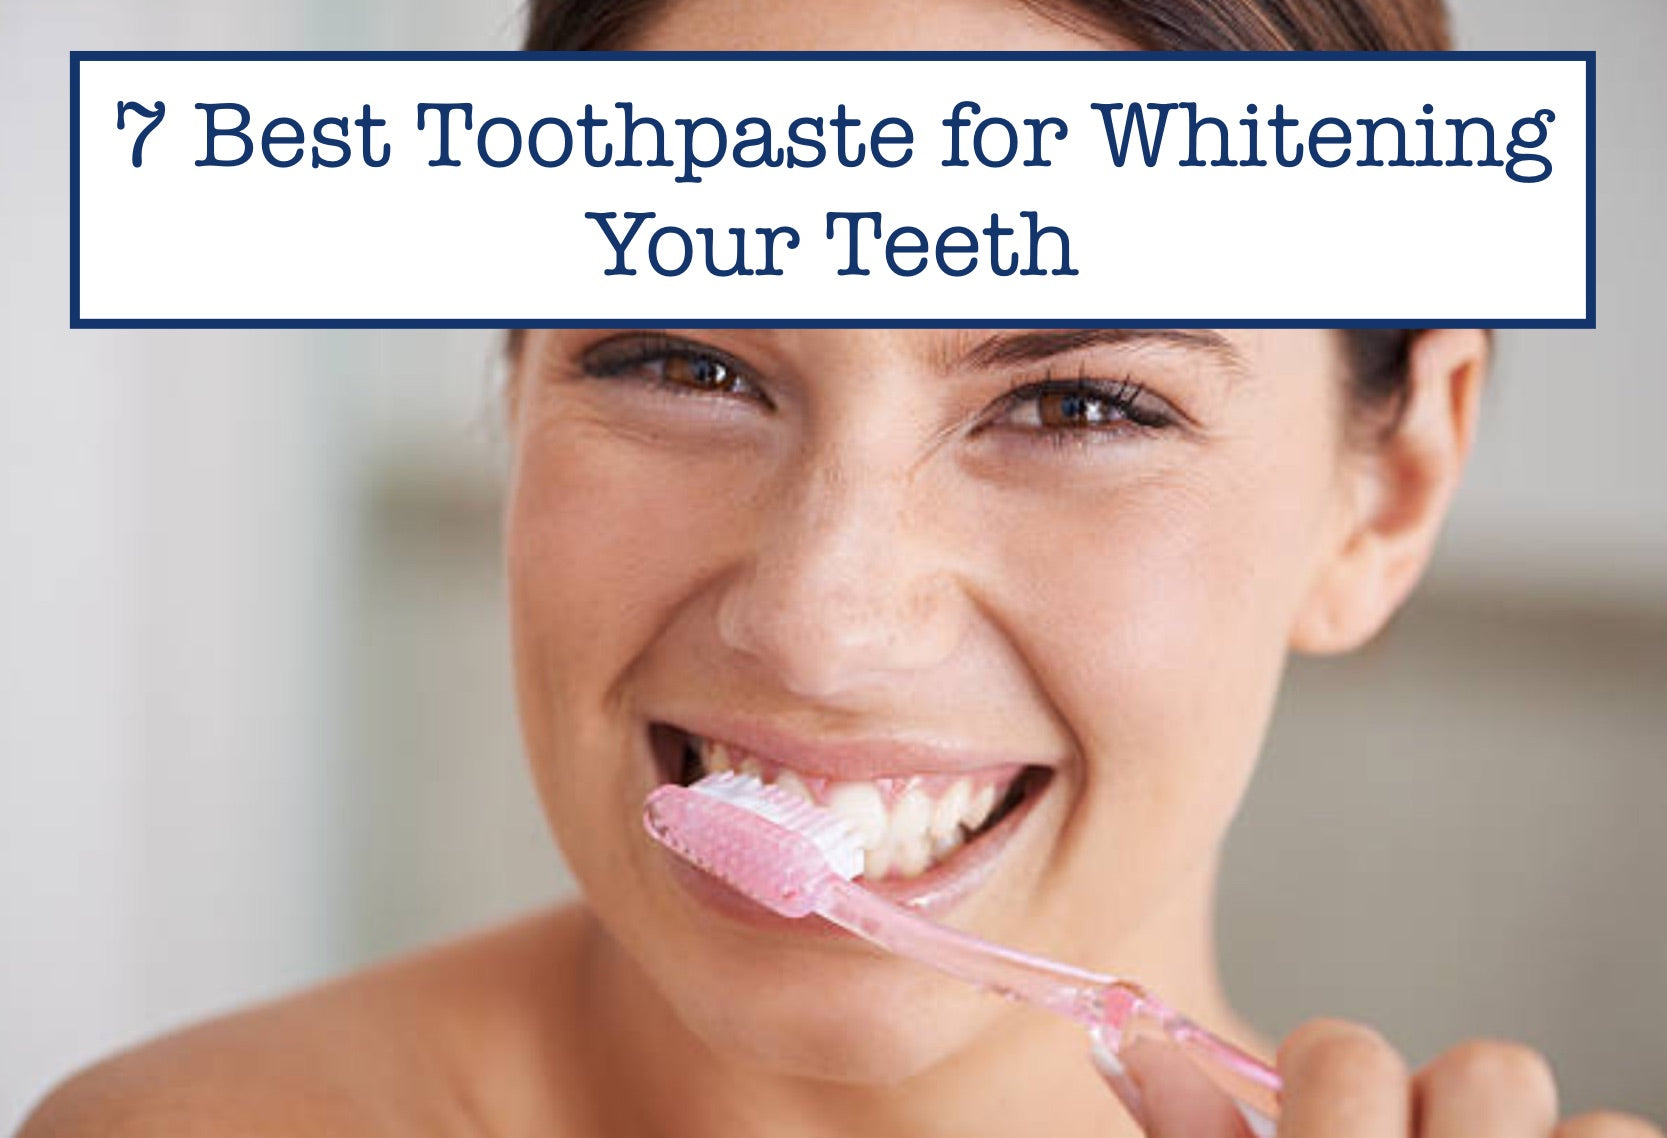 7 Best Toothpaste for Whitening Your Teeth